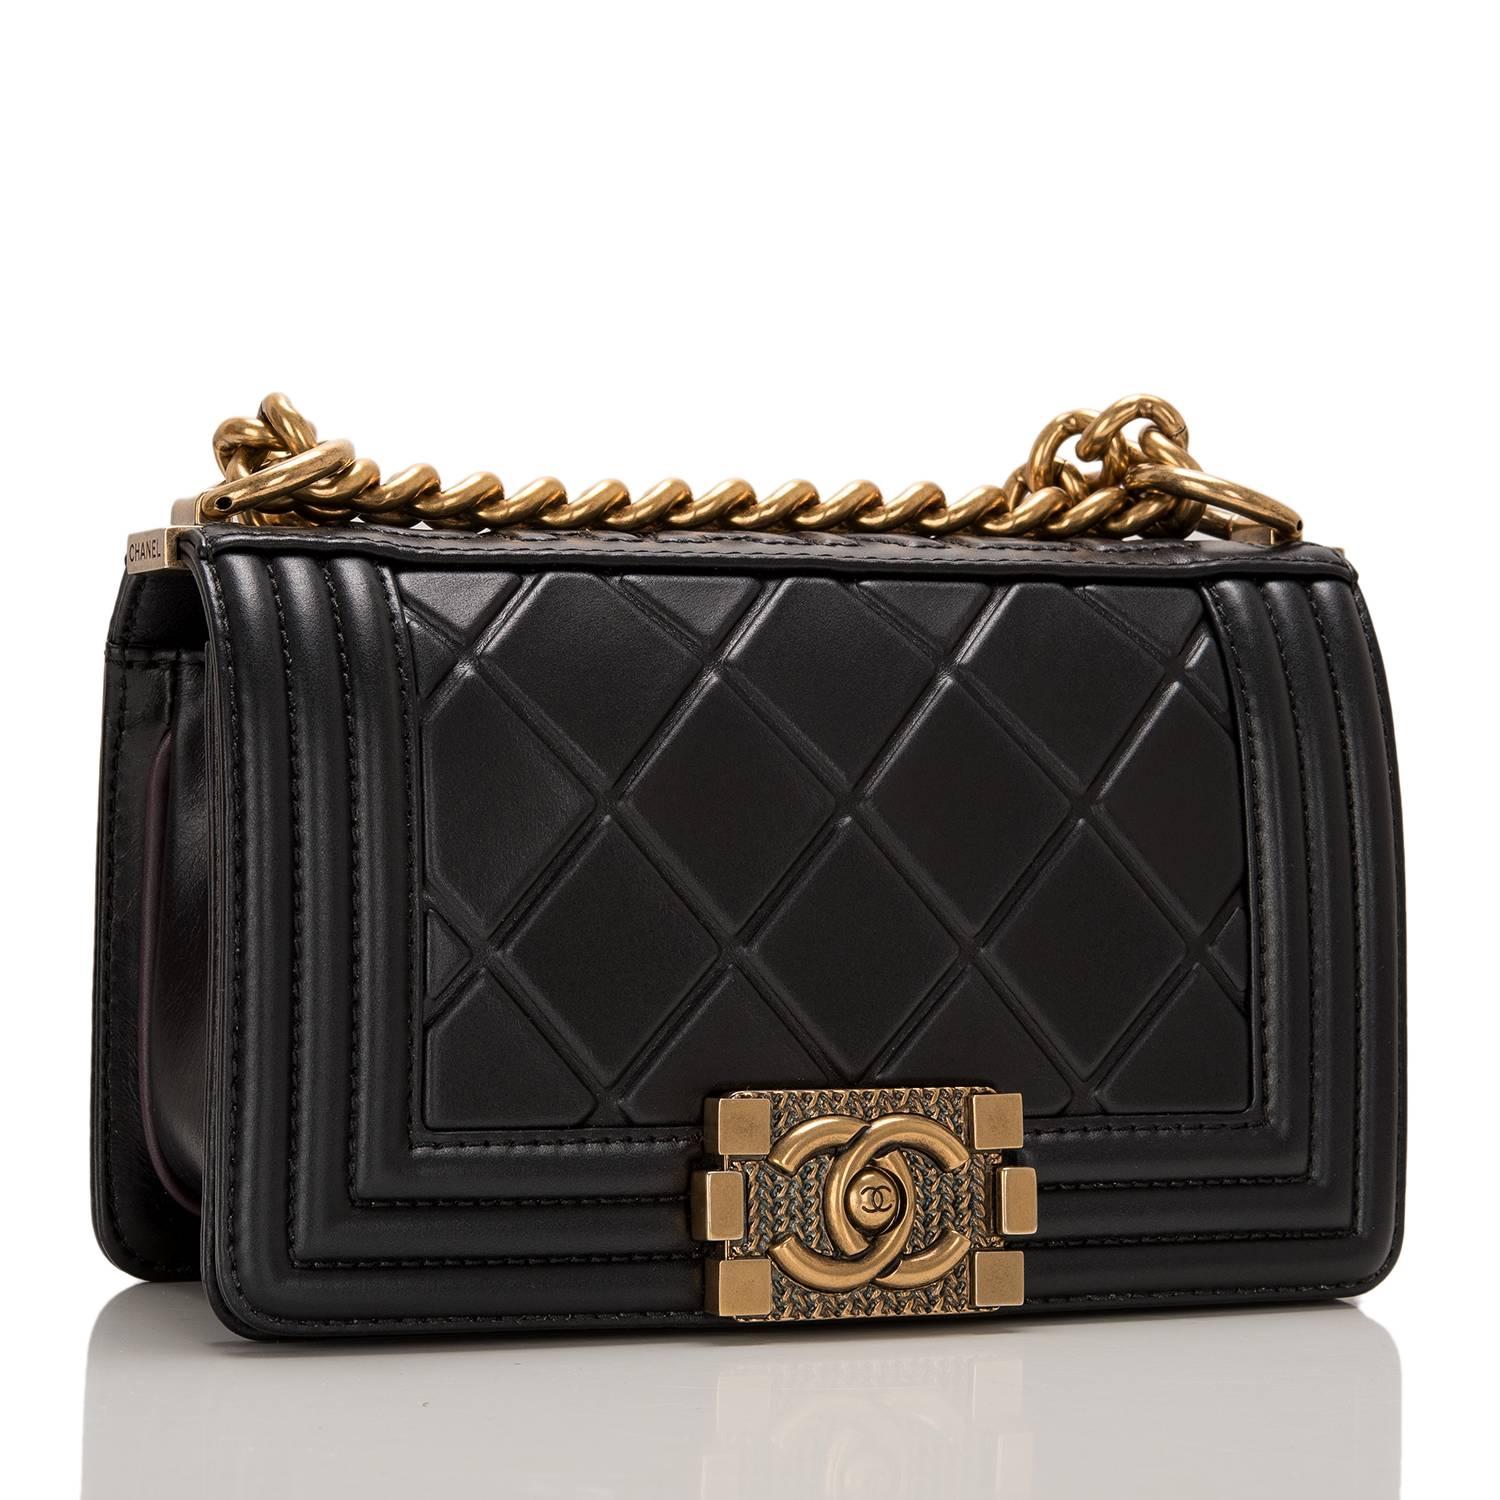 Chanel limited edition Small Boy bag of black quilted calfskin leather accented by antique gold hardware.

The bag has C-H-A-N-E-L in raised letters across the top spine, full front flap with Le Boy CC push lock closure and antique gold tone chain